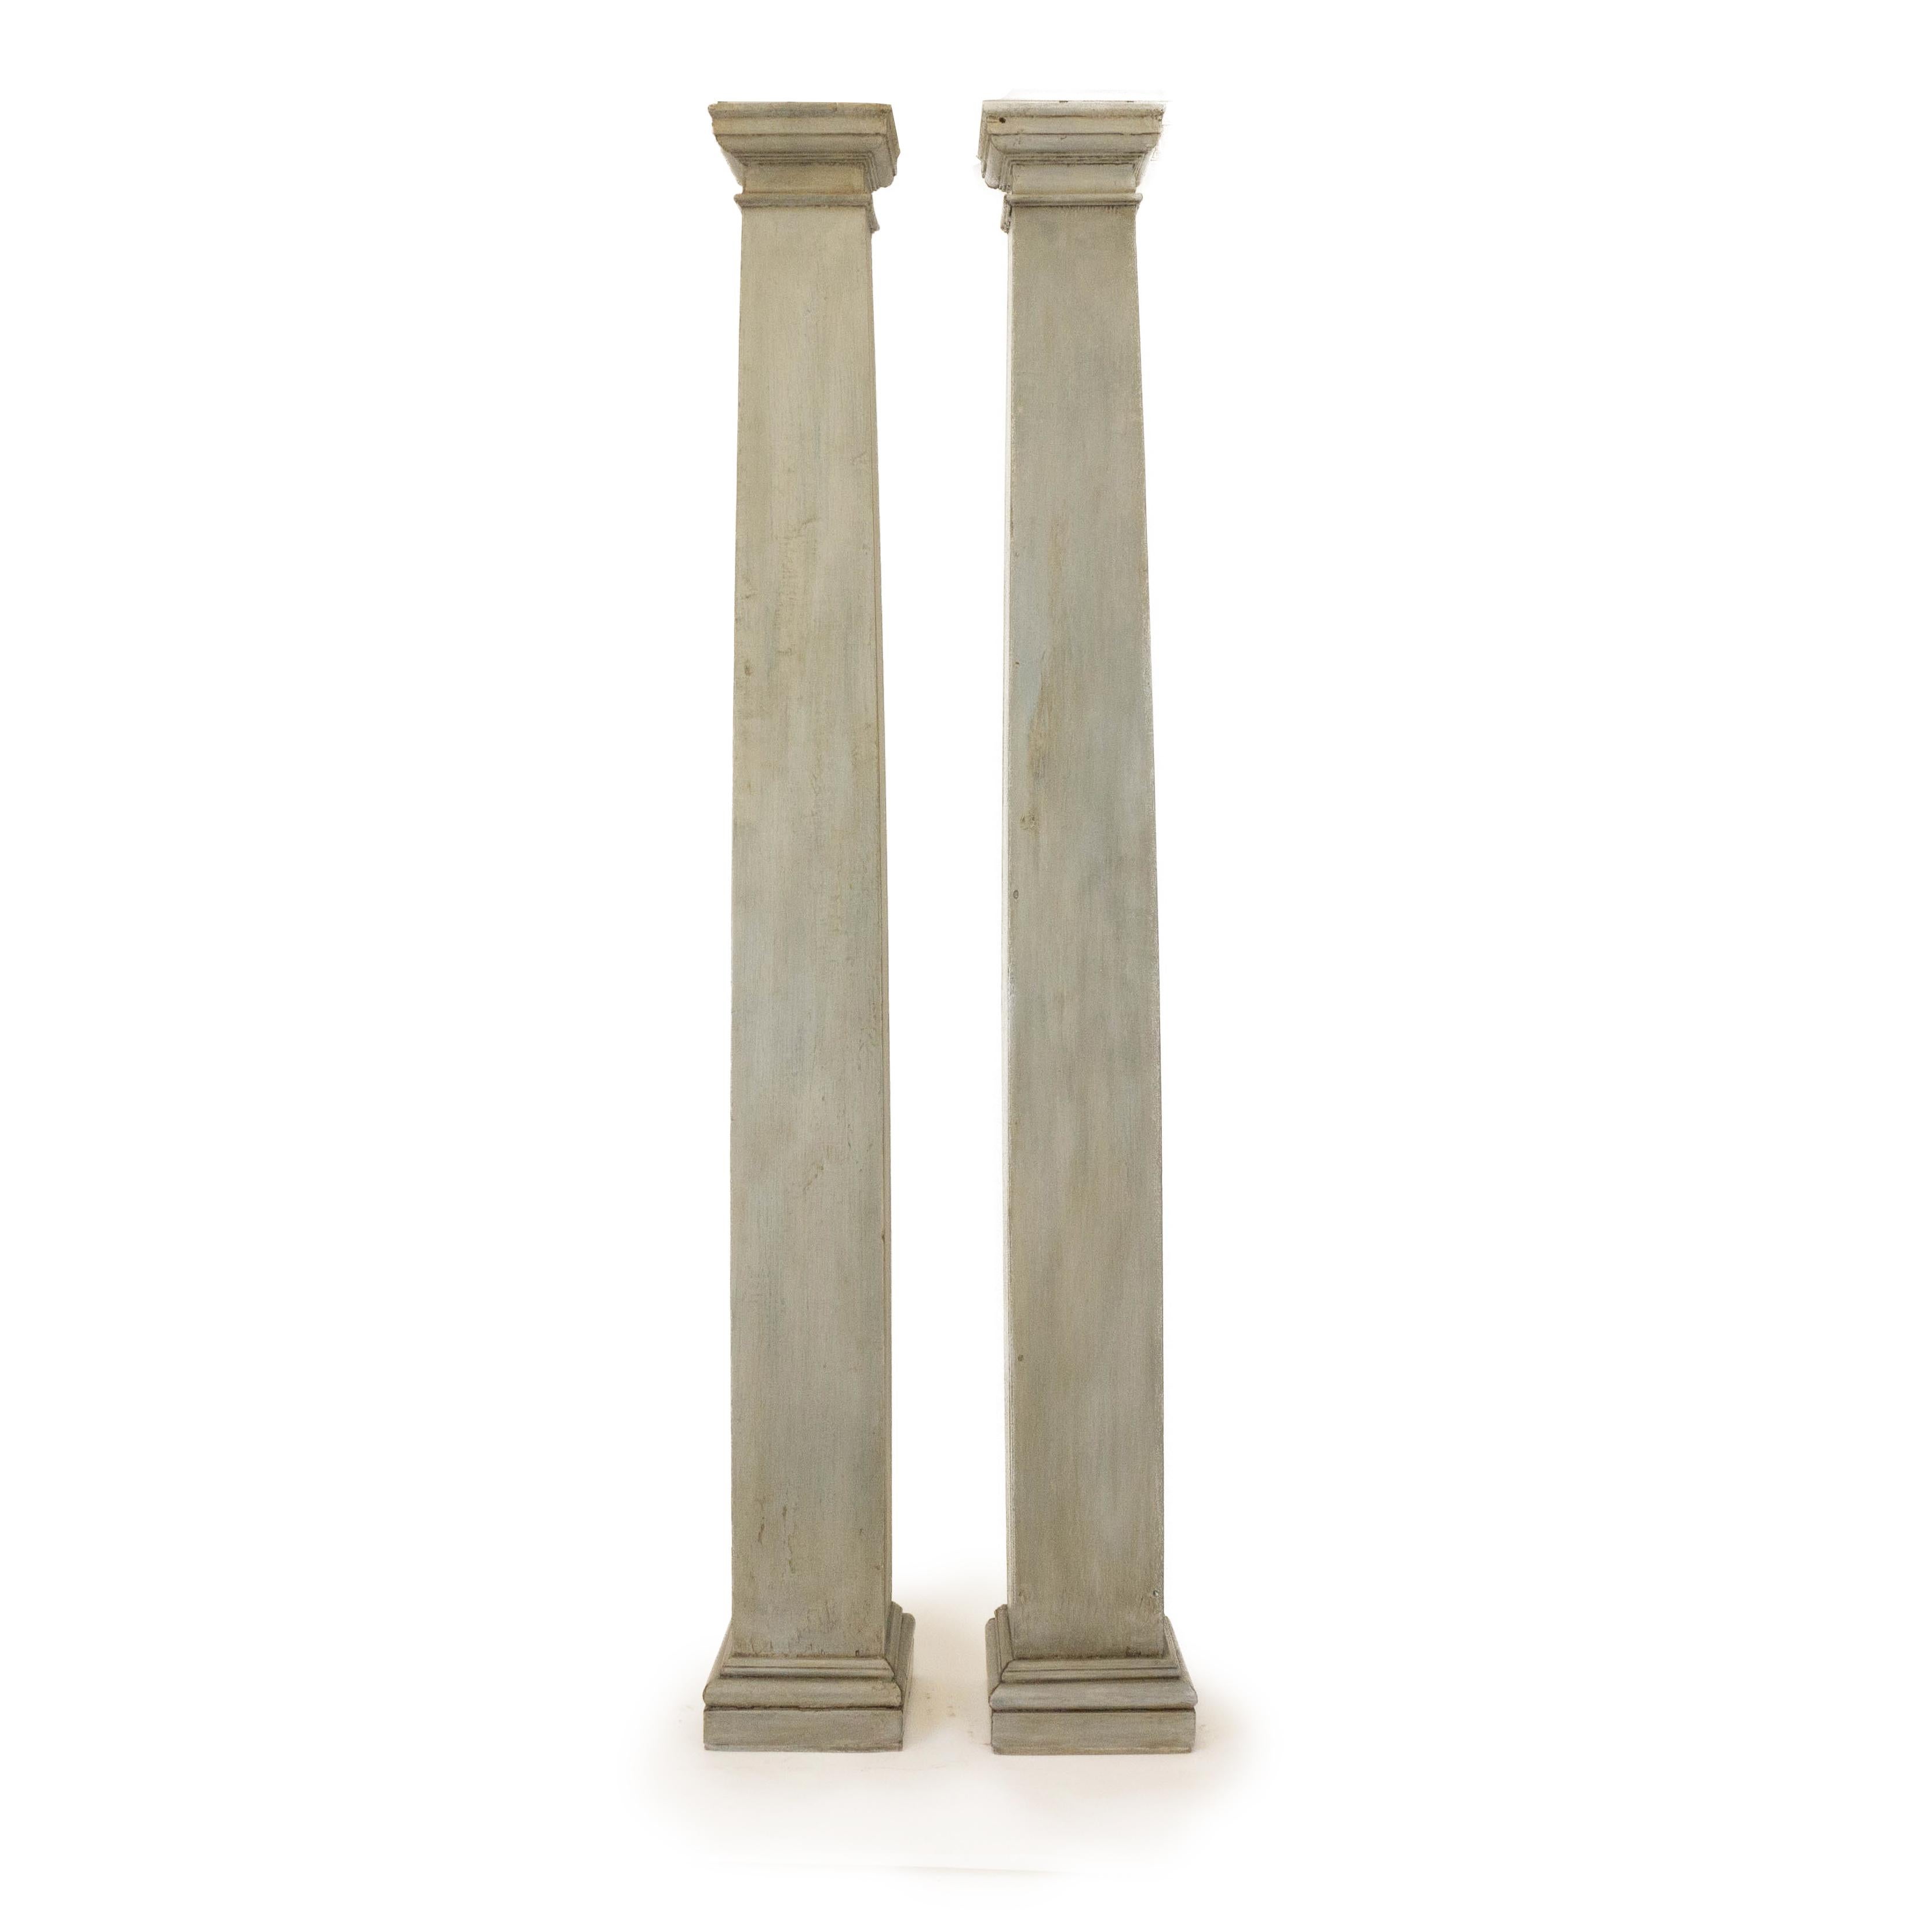 Two antique craftsman style square columns. These rustic columns are one of a kind and were discovered on an estate in Litchfield, Connecticut. Made out of solid wood, these columns stand sturdy. The finish is a combination of warm and cool tones